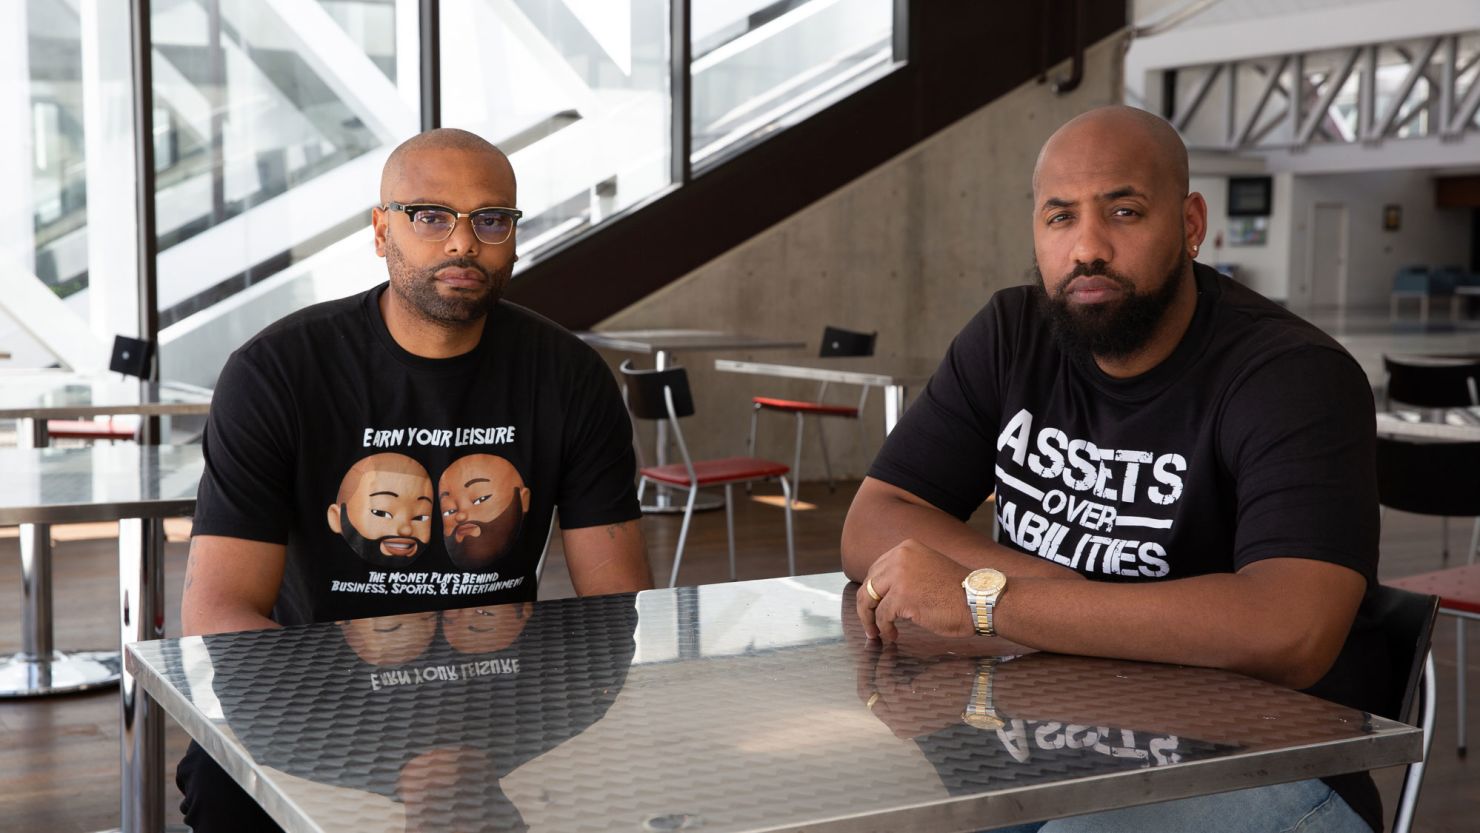 Troy Millings, right, and Rashad Bilal pose for a portrait in Atlanta on June 2, 2023. Rashad Bilal and Troy Millings started their educational platform "Earn Your Leisure" to close the racial wealth gap by sharing information about budgeting, starting a business and investing.